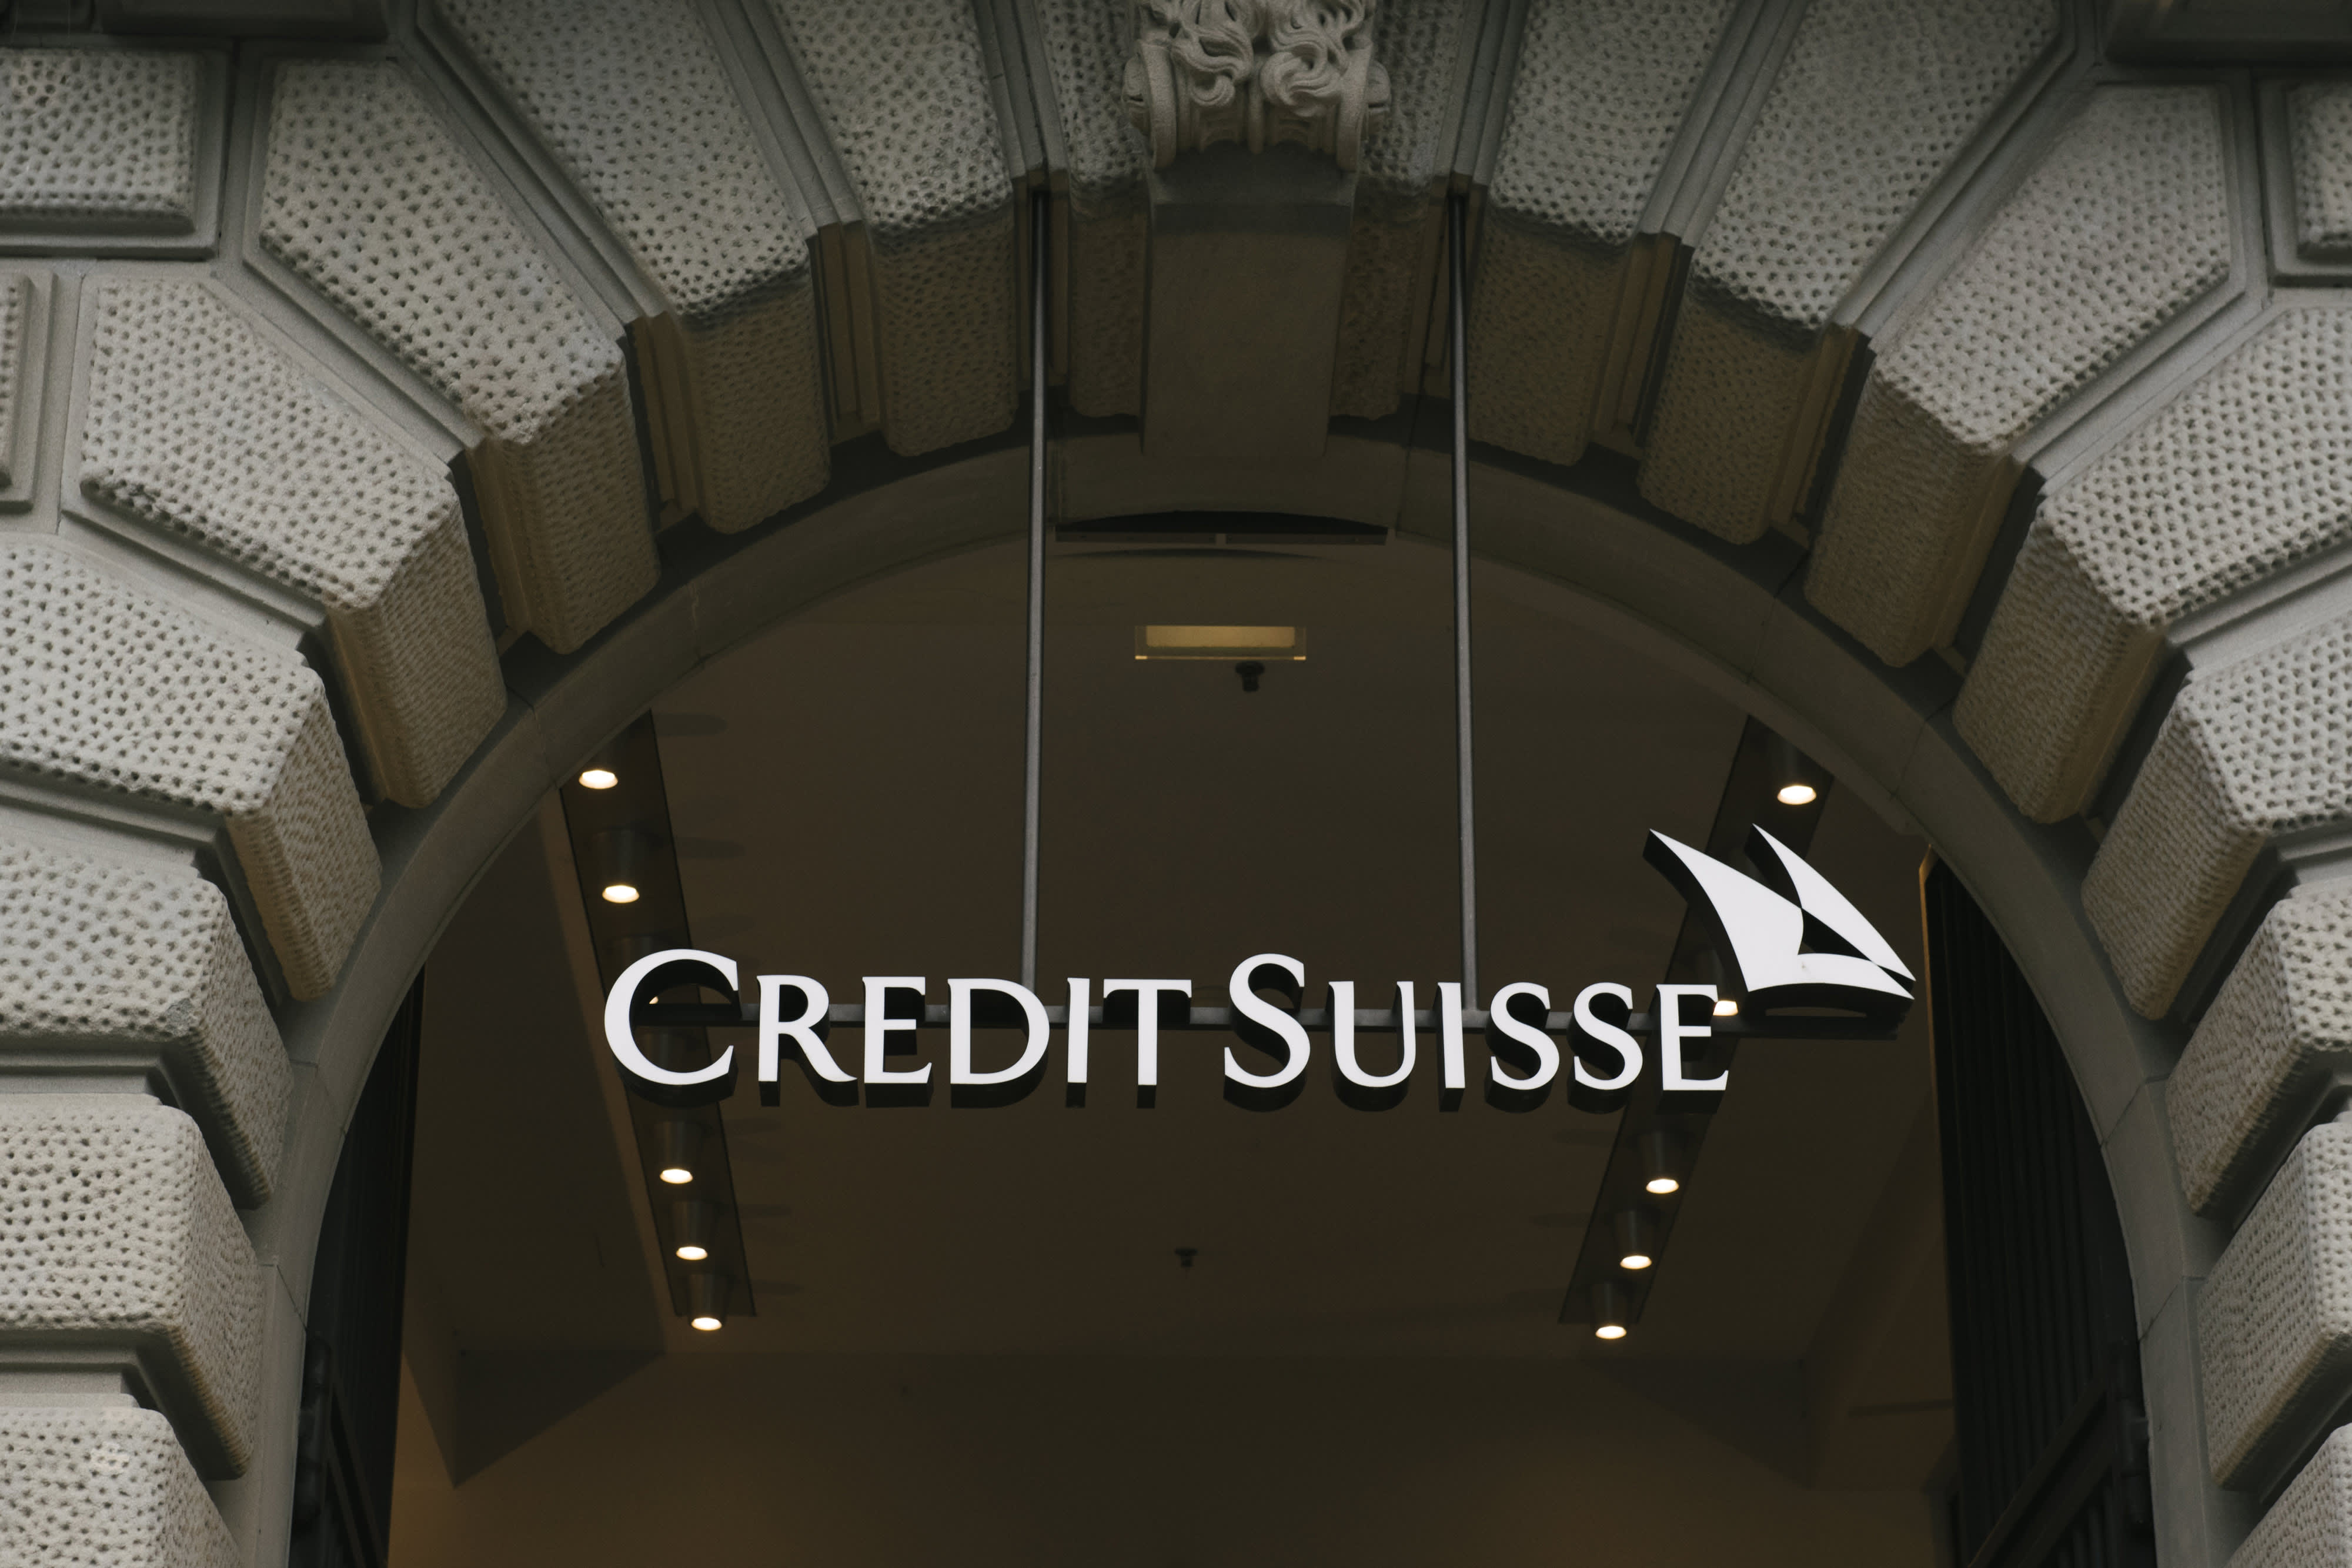 Switzerland's second-biggest bank is trying to get back on track after a string of scandals and losses.